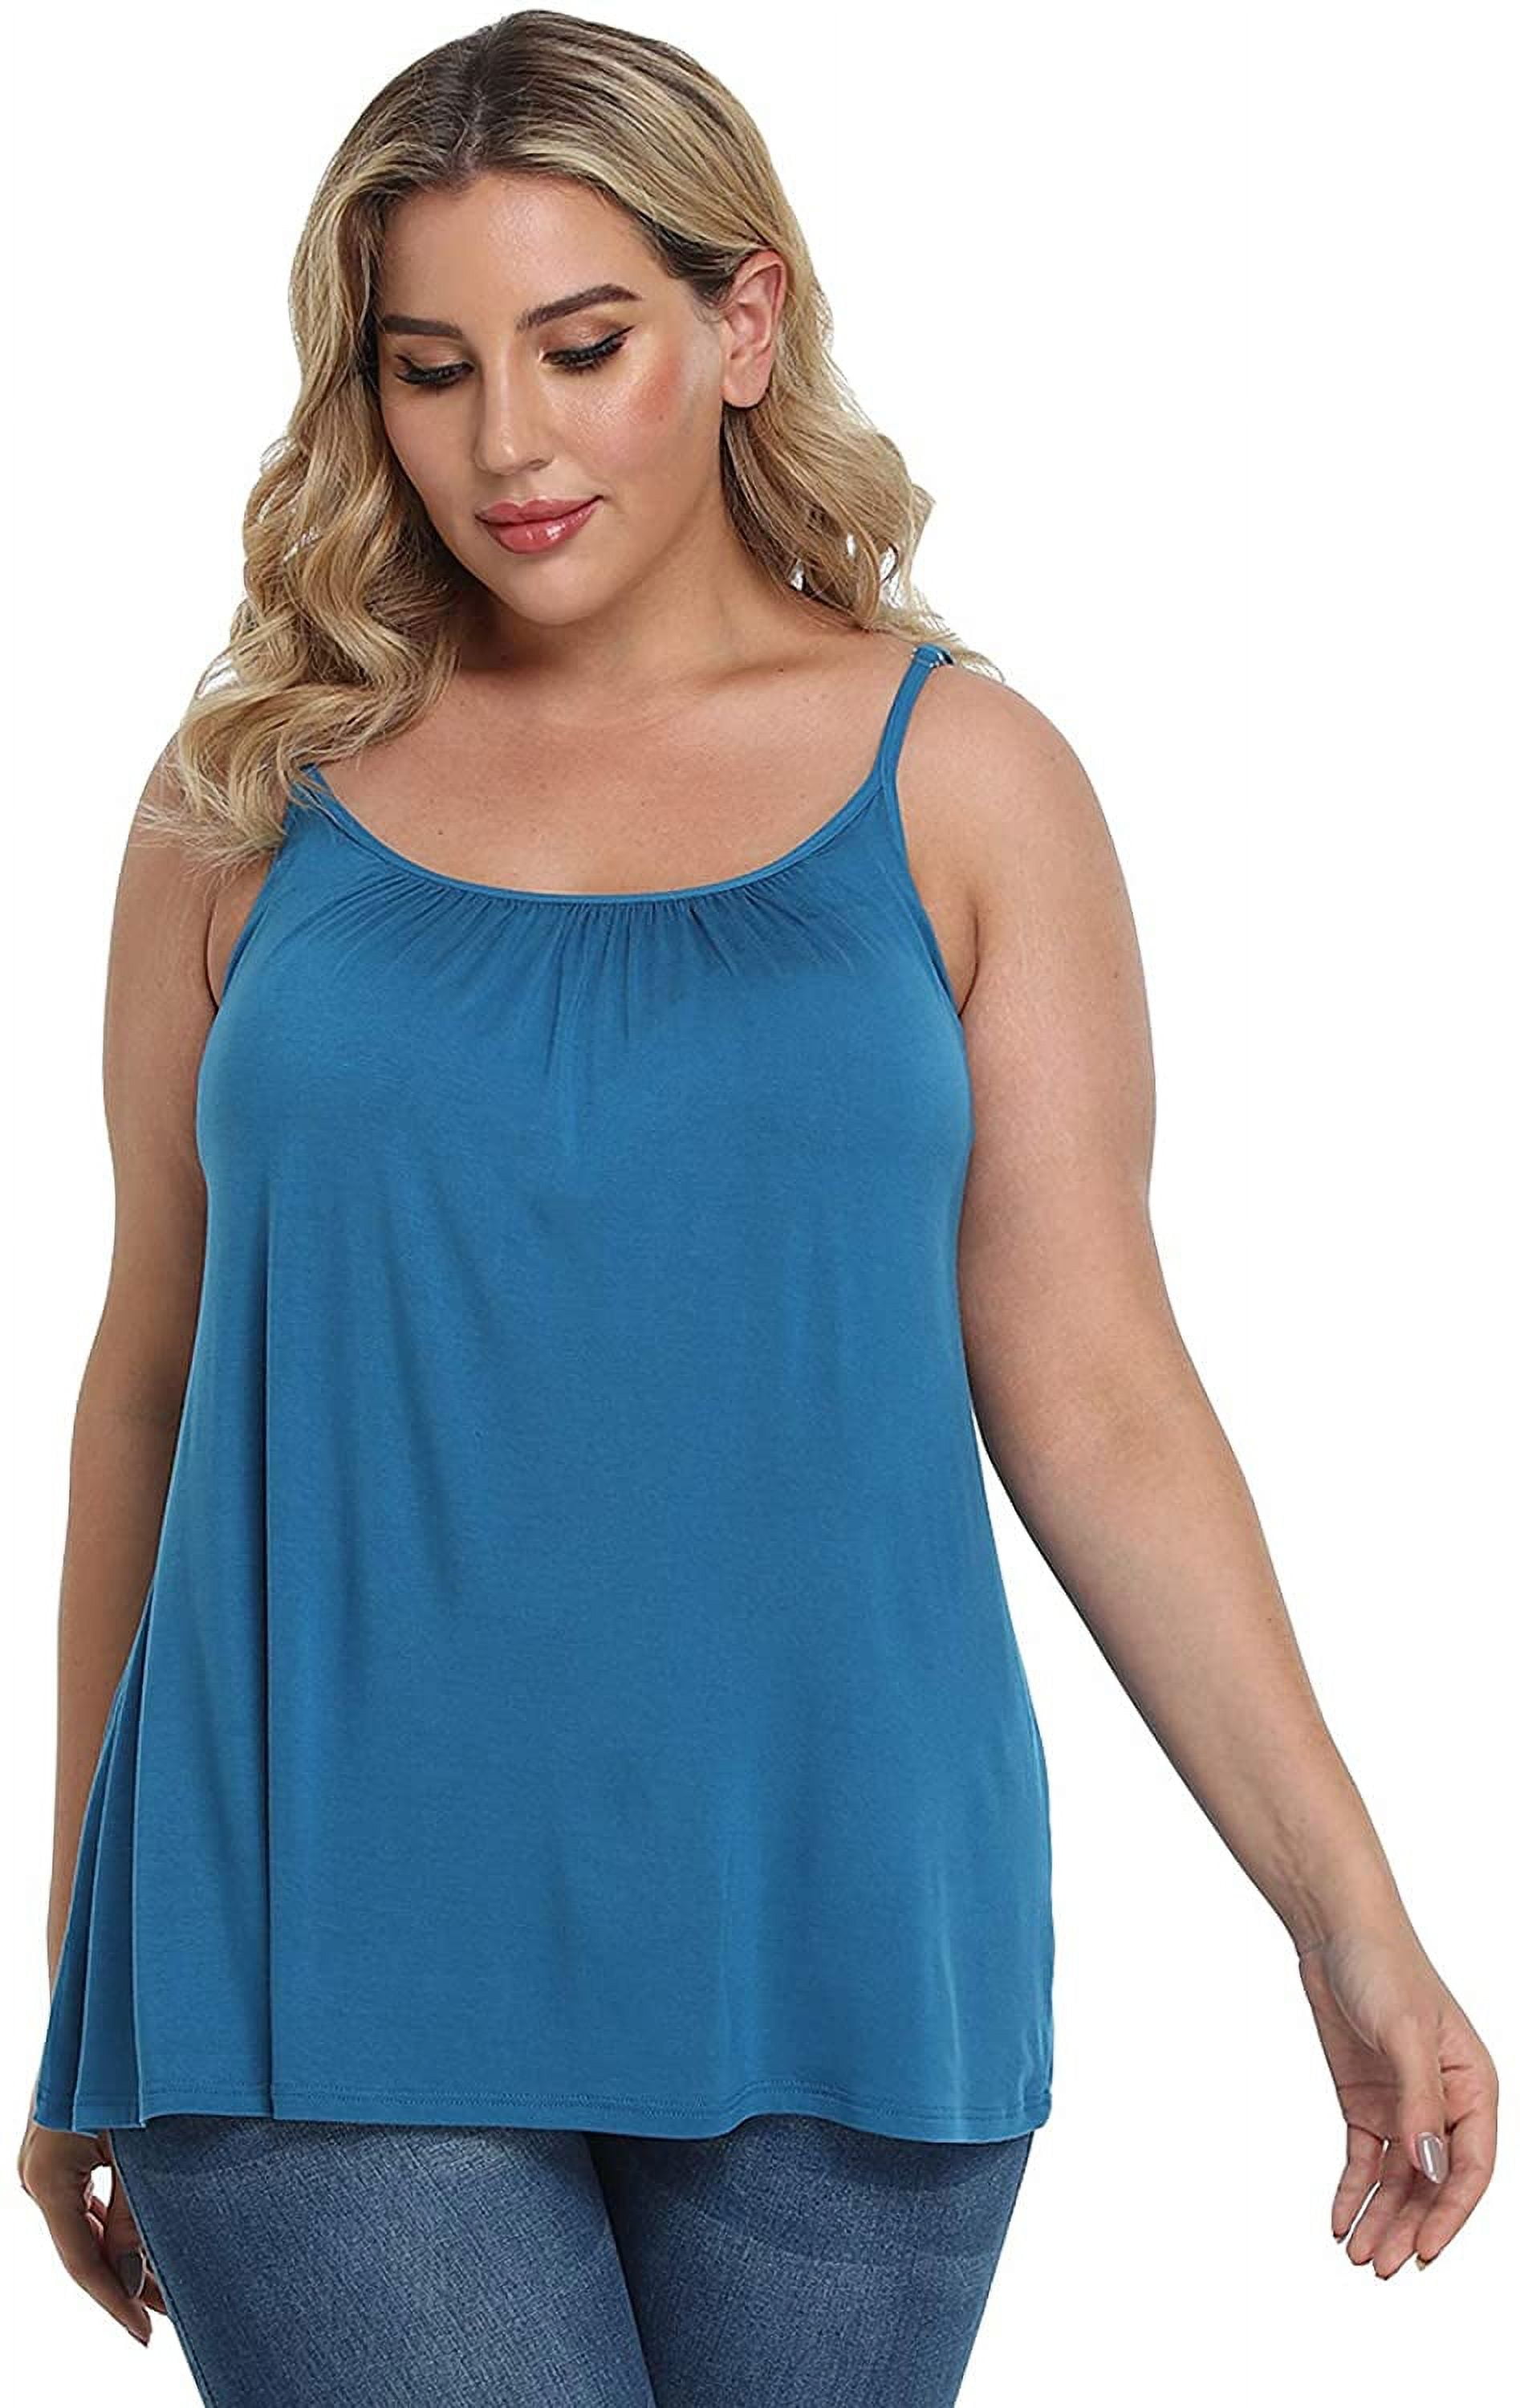 MANIFIQUE Women's Camisoles with Built in Bra Top Plus Size Flowy Swing  Pleated Tank Top with Wide Strap (S-4XL) 